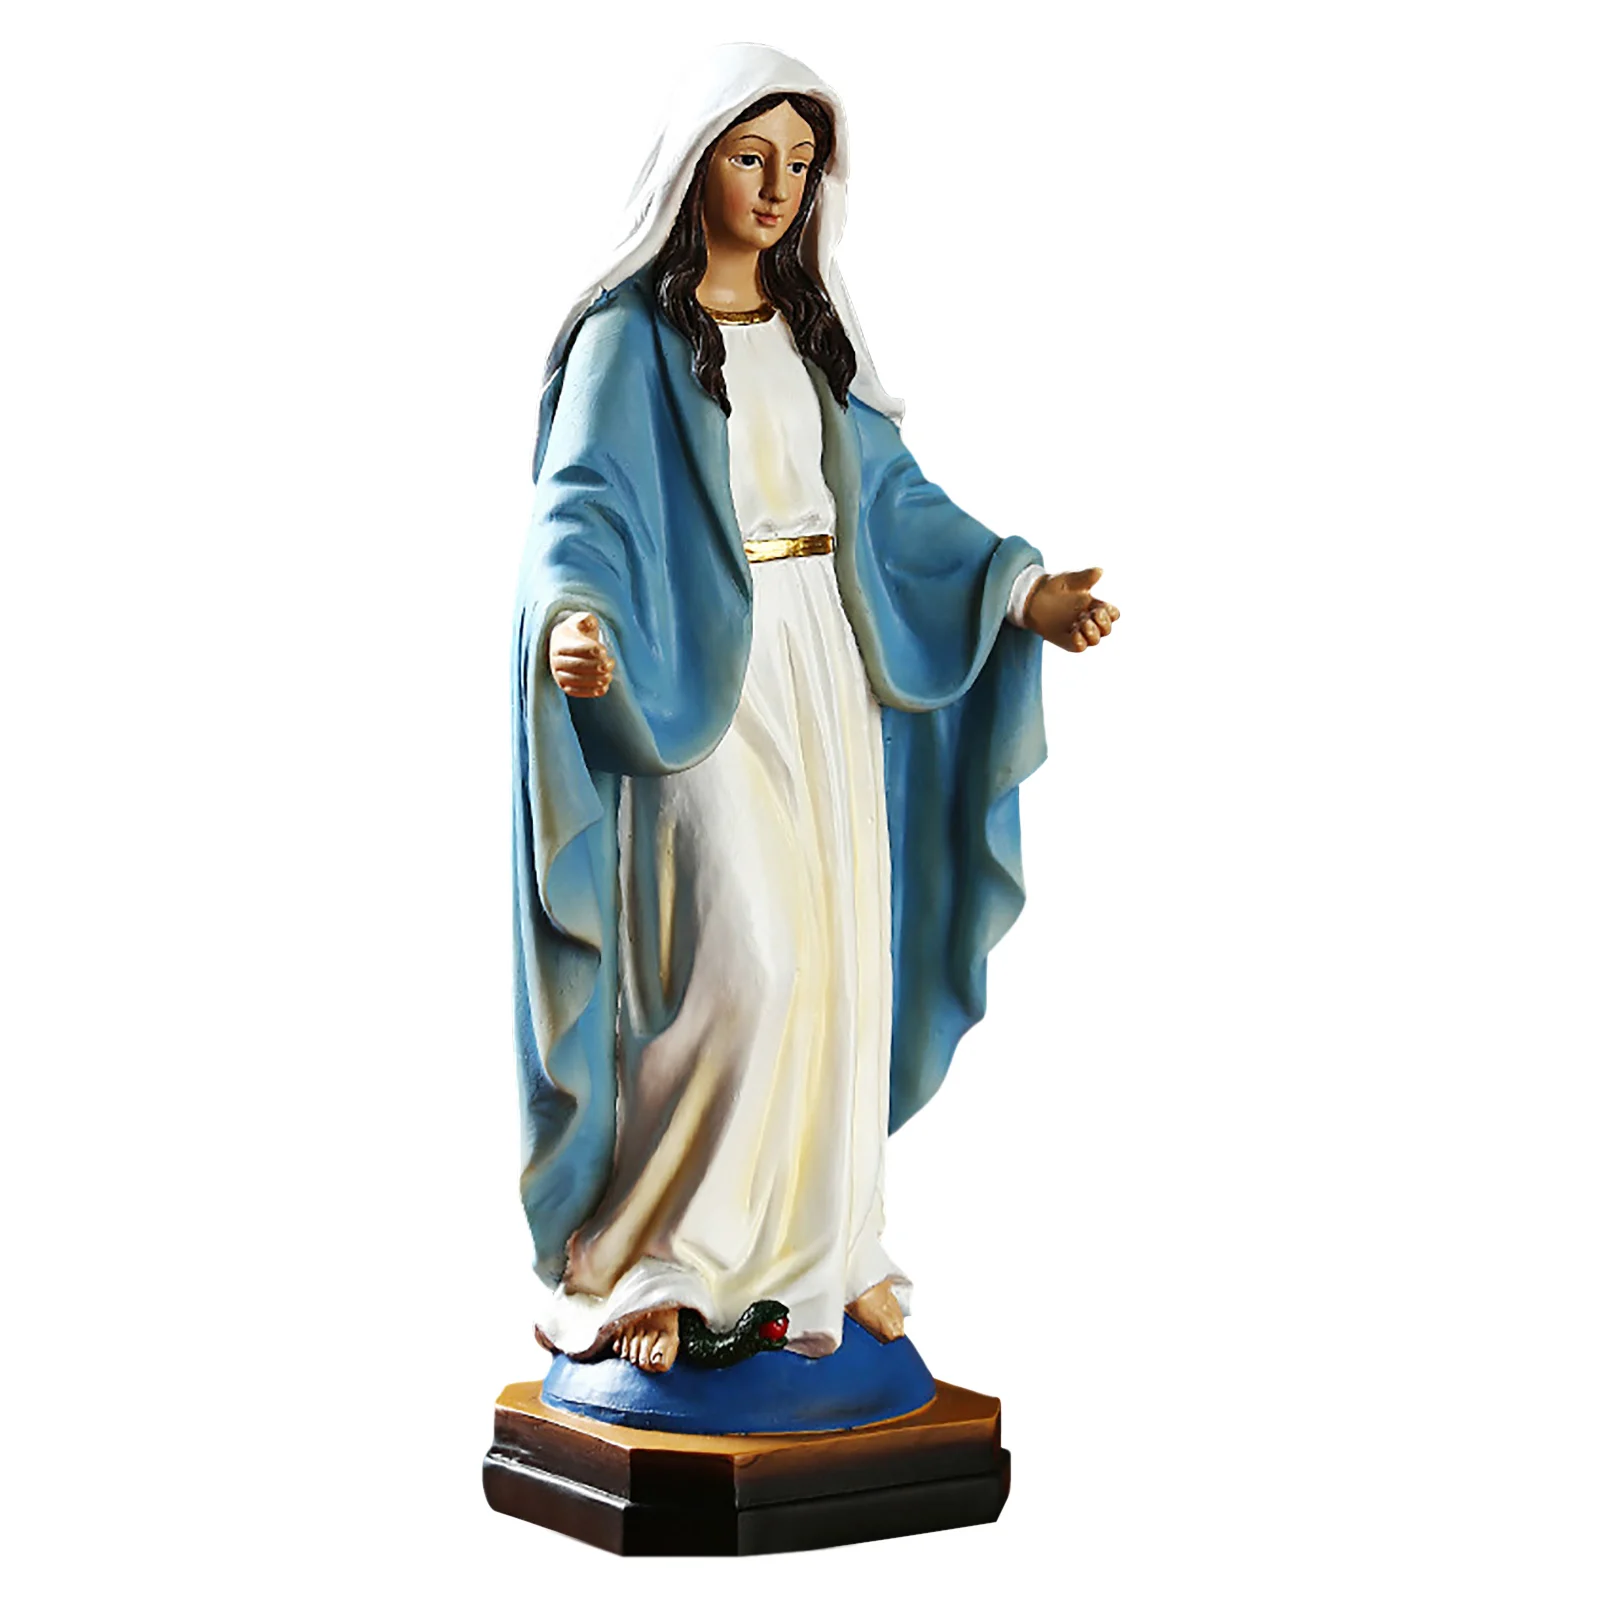 

Religious Virgin Mary Statue 8.8 Our Lady of Grace Sculpture Virgin Mary Blessed Statue Resin Figurine Mother Madonna Catholic